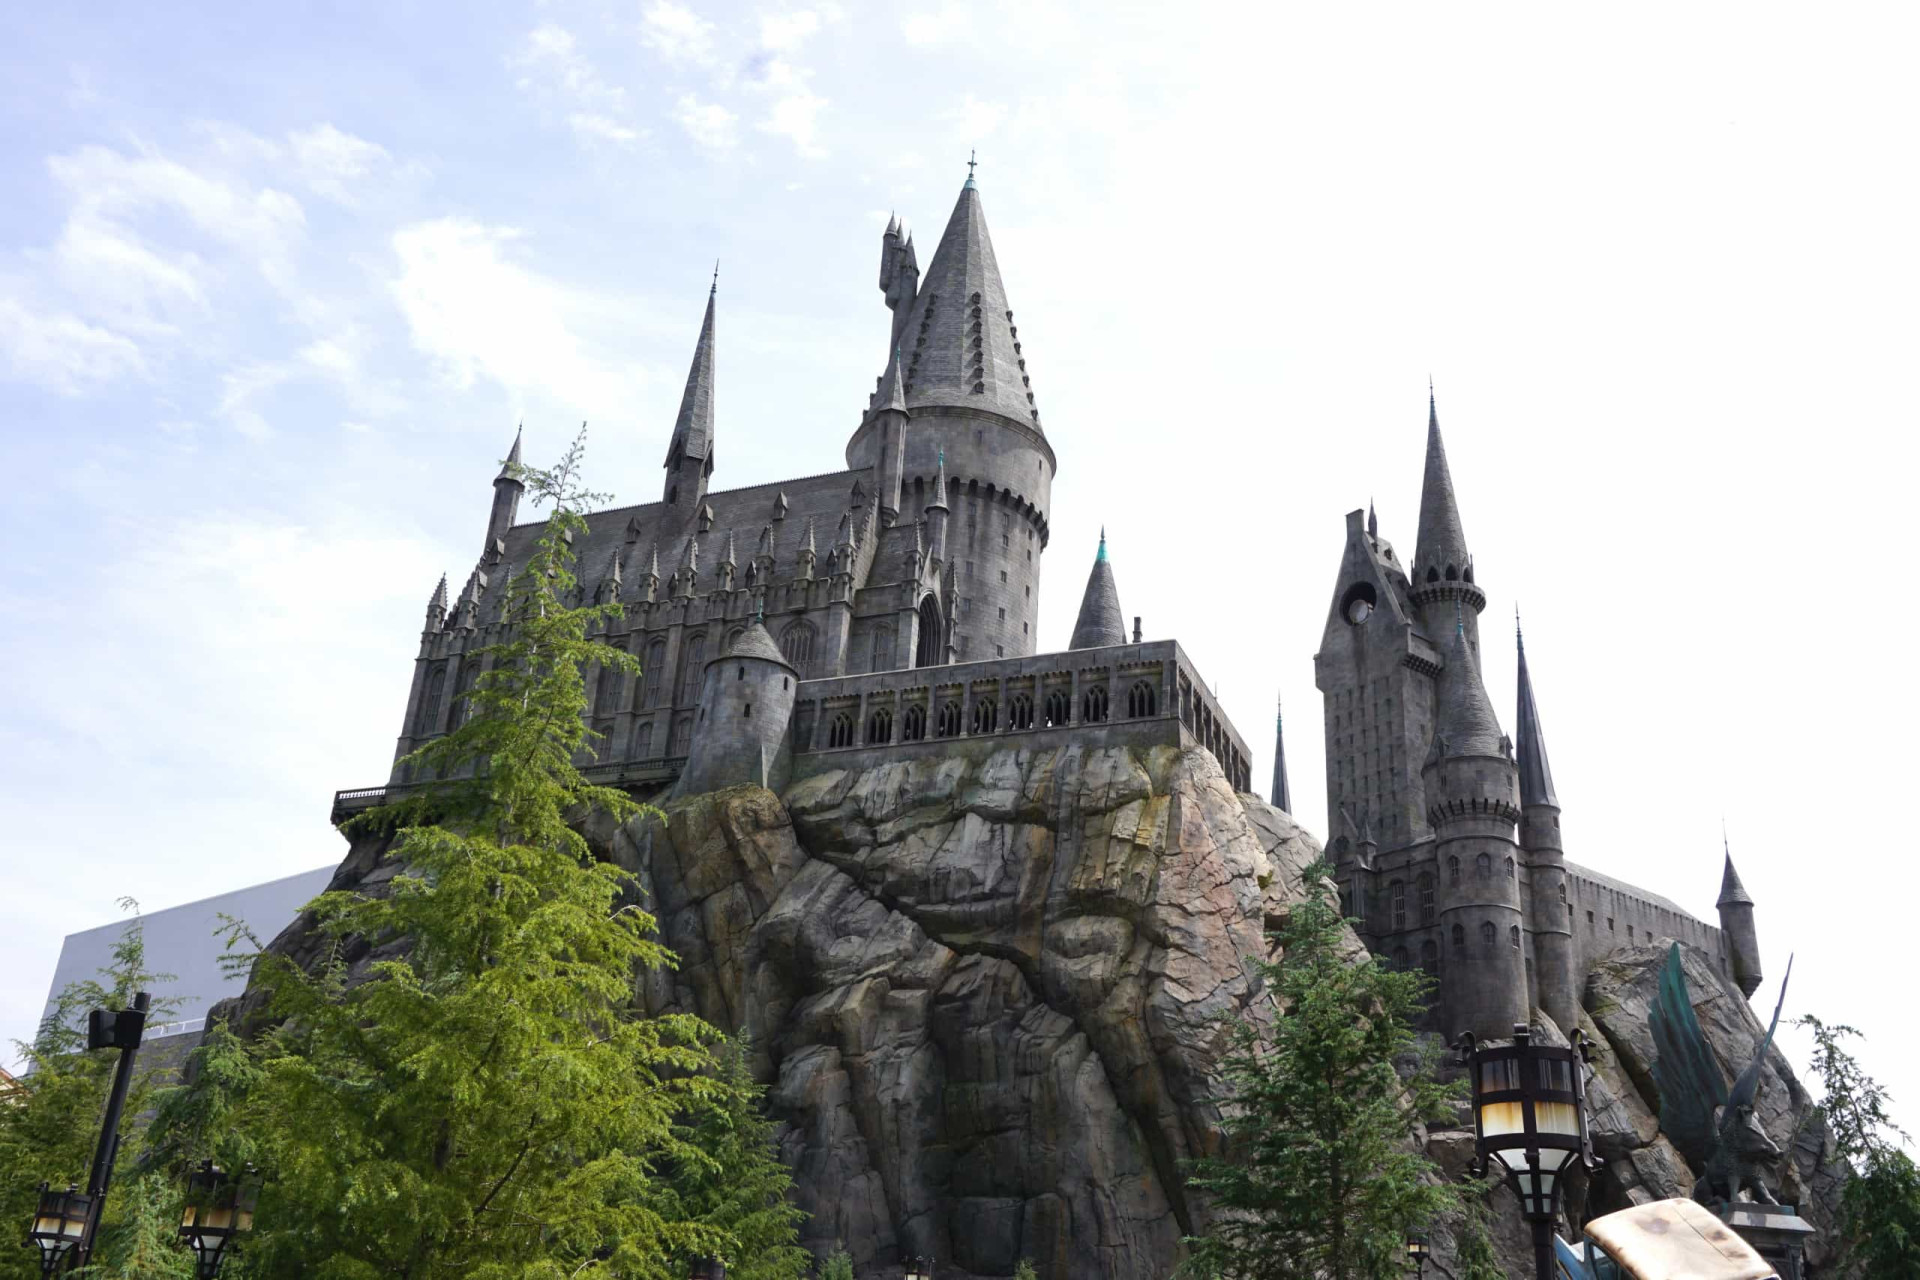 <p>The iconic castle from the films has also been recreated in real life, also at Universal Studios. Incredible, right?</p><p><a href="https://www.msn.com/en-us/community/channel/vid-7xx8mnucu55yw63we9va2gwr7uihbxwc68fxqp25x6tg4ftibpra?cvid=94631541bc0f4f89bfd59158d696ad7e">Follow us and access great exclusive content every day</a></p>